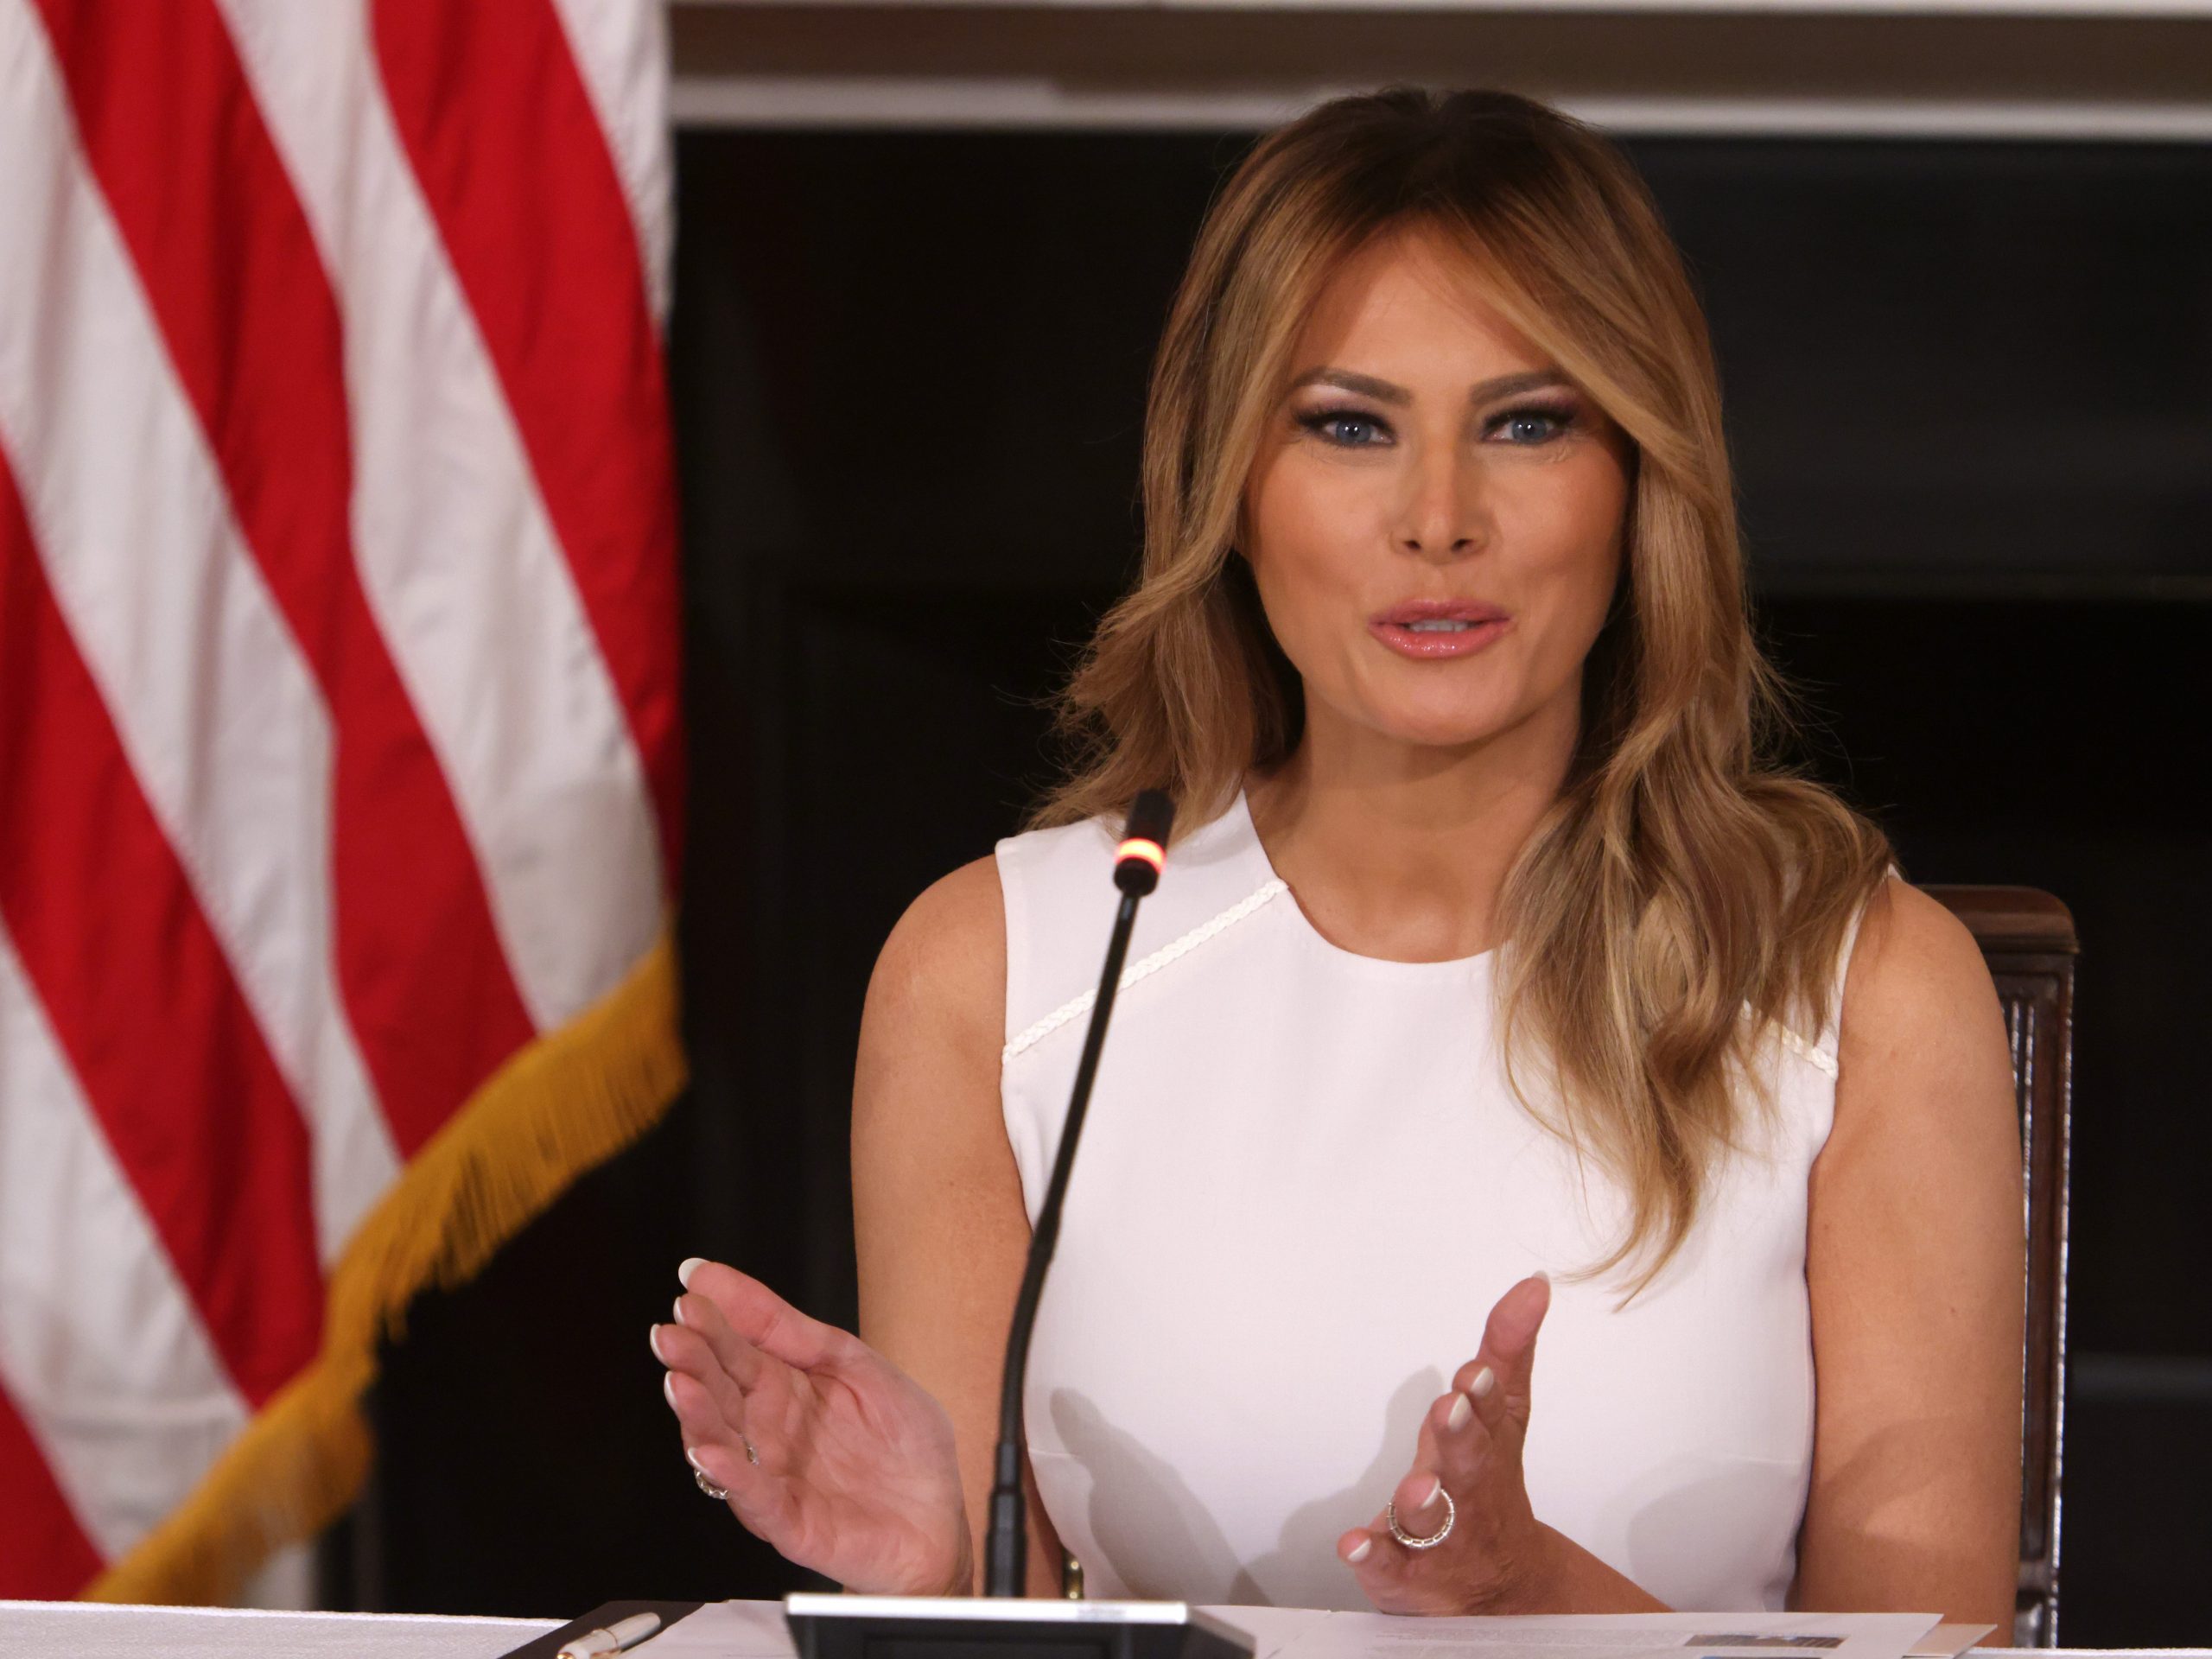 Former US First Lady Melania Trump speaks during a roundtable on sickle cell disease in the State Dining Room of the White House on September 14, 2020 in Washington, DC.